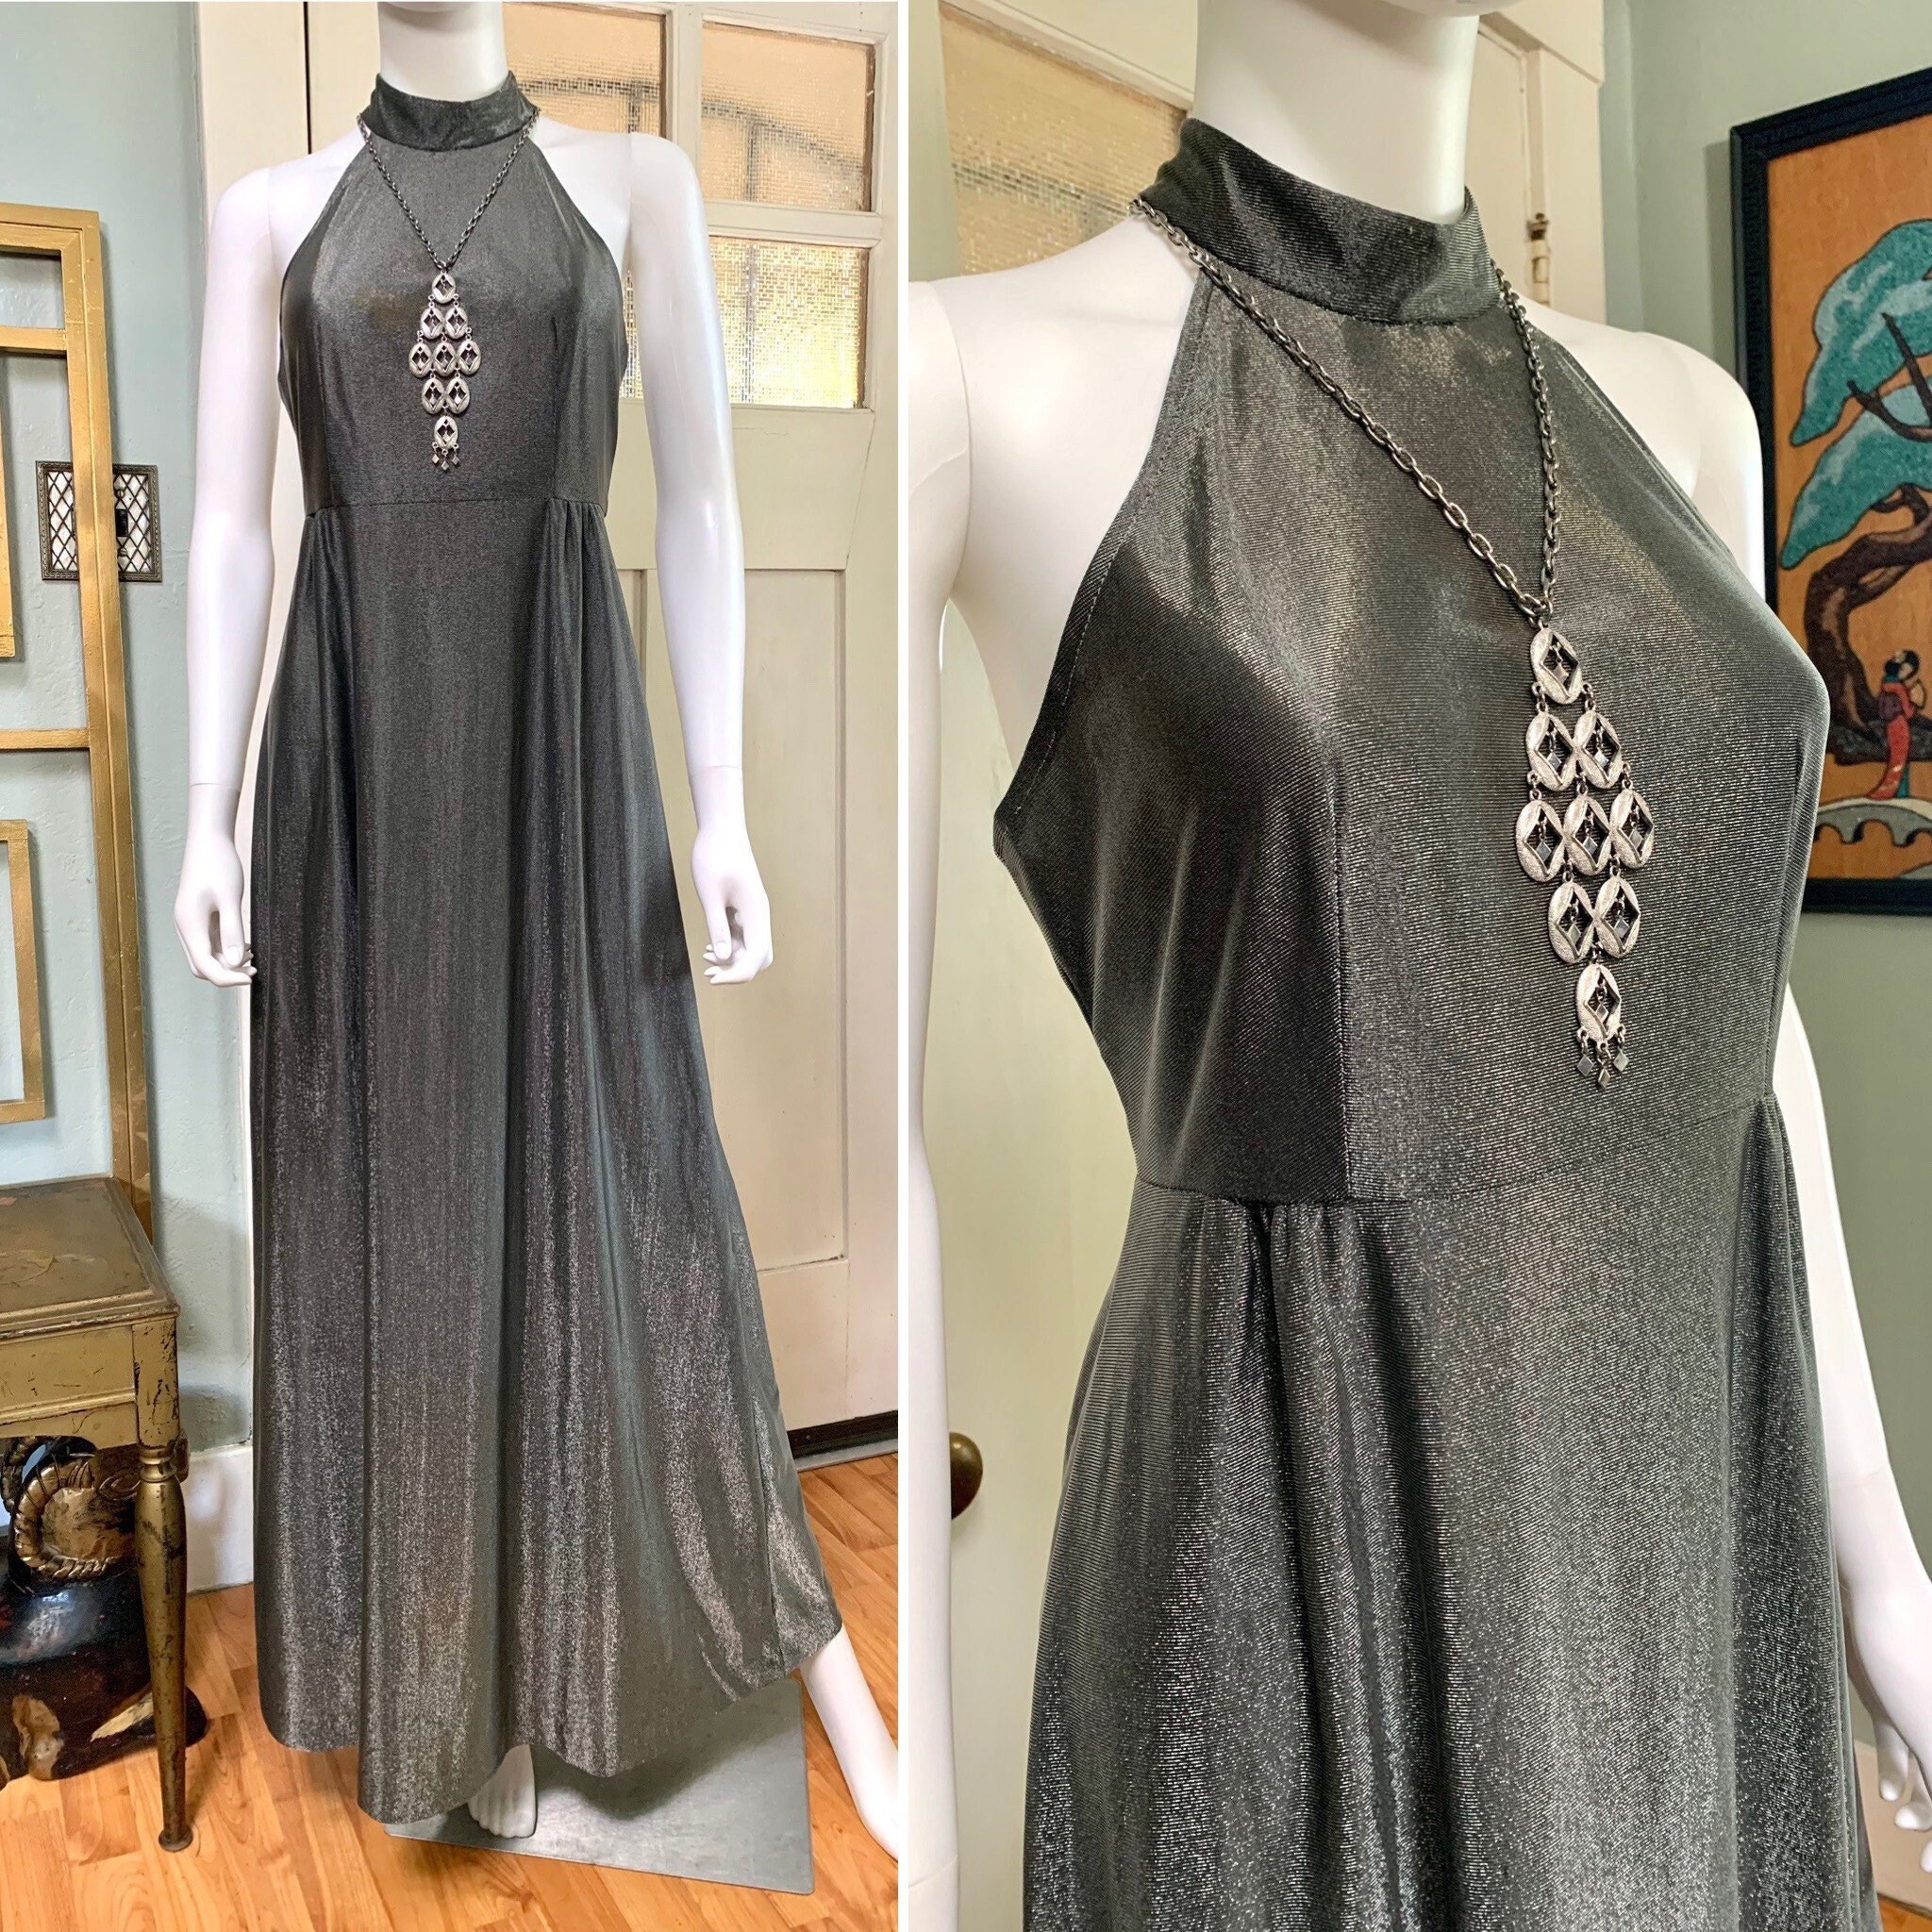 Vintage Aprons, Retro Aprons, Old Fashioned Aprons & Patterns Vintage 60S Small Dark Gray  Silver Sleeveless Maxi Dress $82.00 AT vintagedancer.com